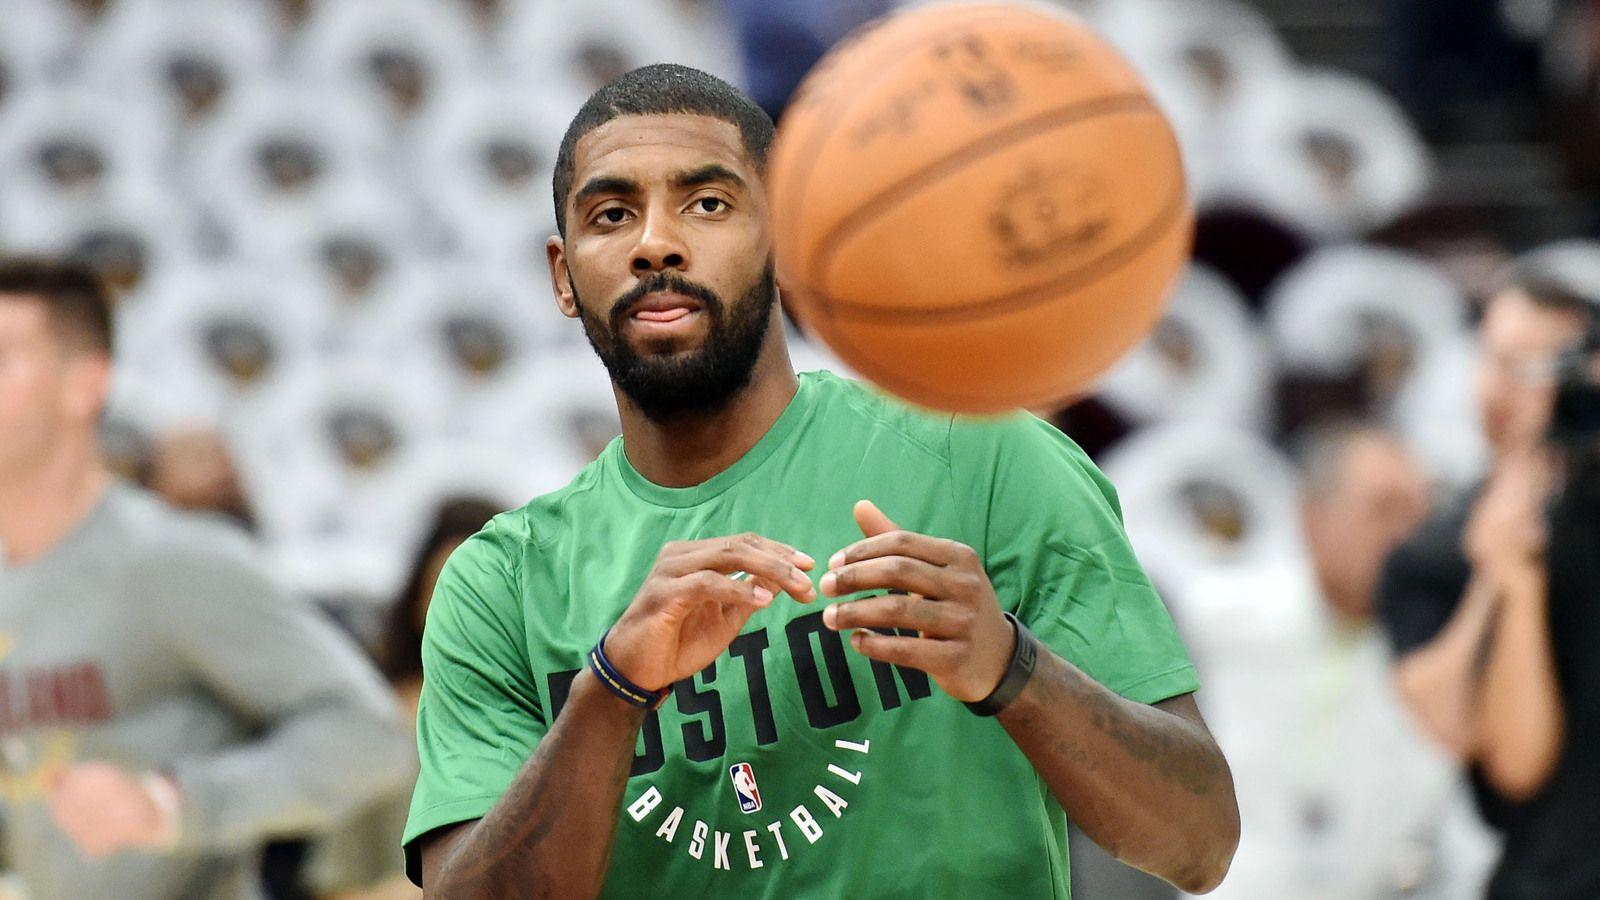 Watch: Kyrie Irving booed in return to Cleveland